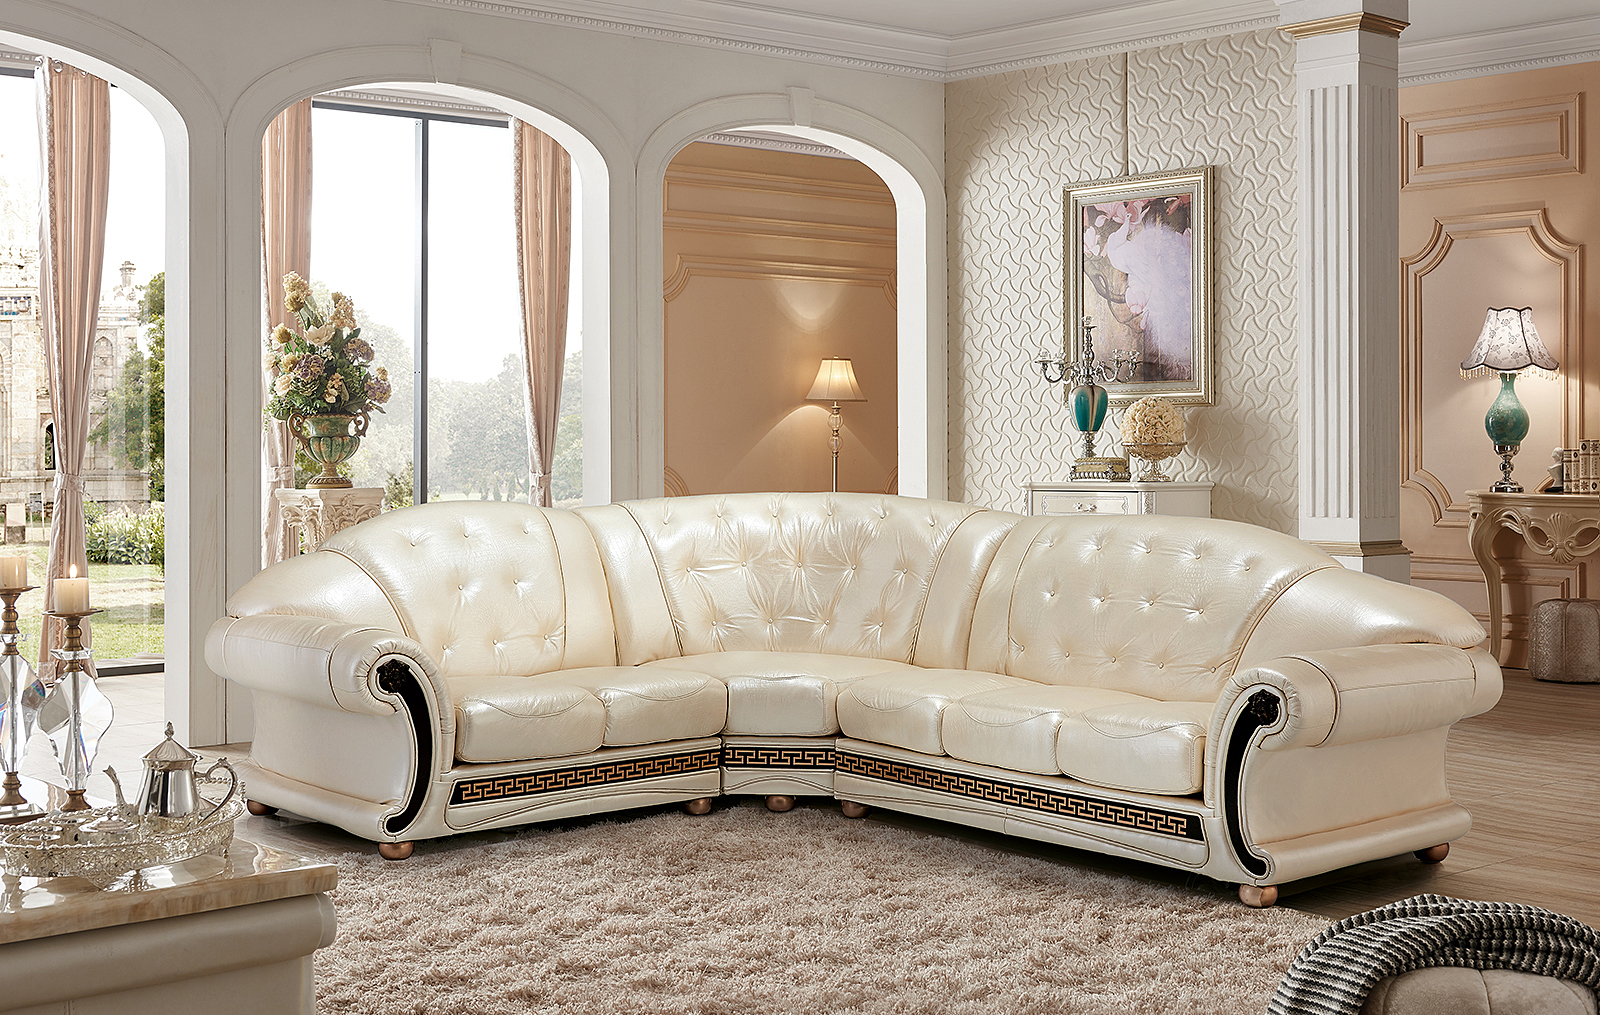 Living Room Furniture Sleepers Sofas Loveseats and Chairs Apolo Sectional Pearl